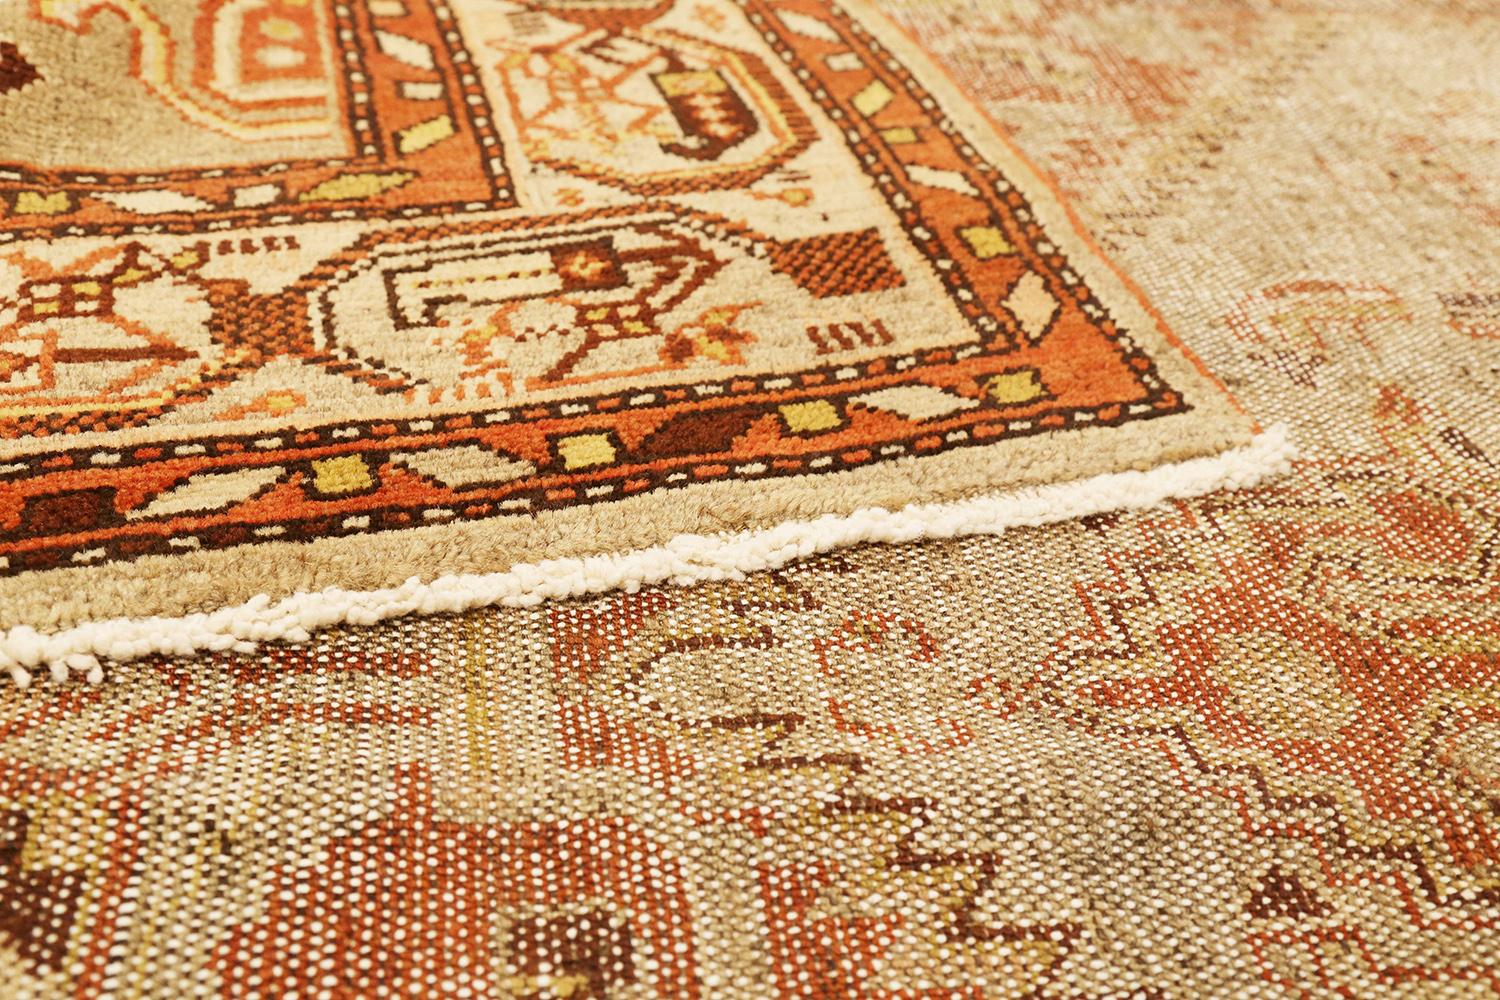 Hand-Woven Antique Persian Khamseh Rug with Brown and Ivory Tribal Details on Orange Field For Sale